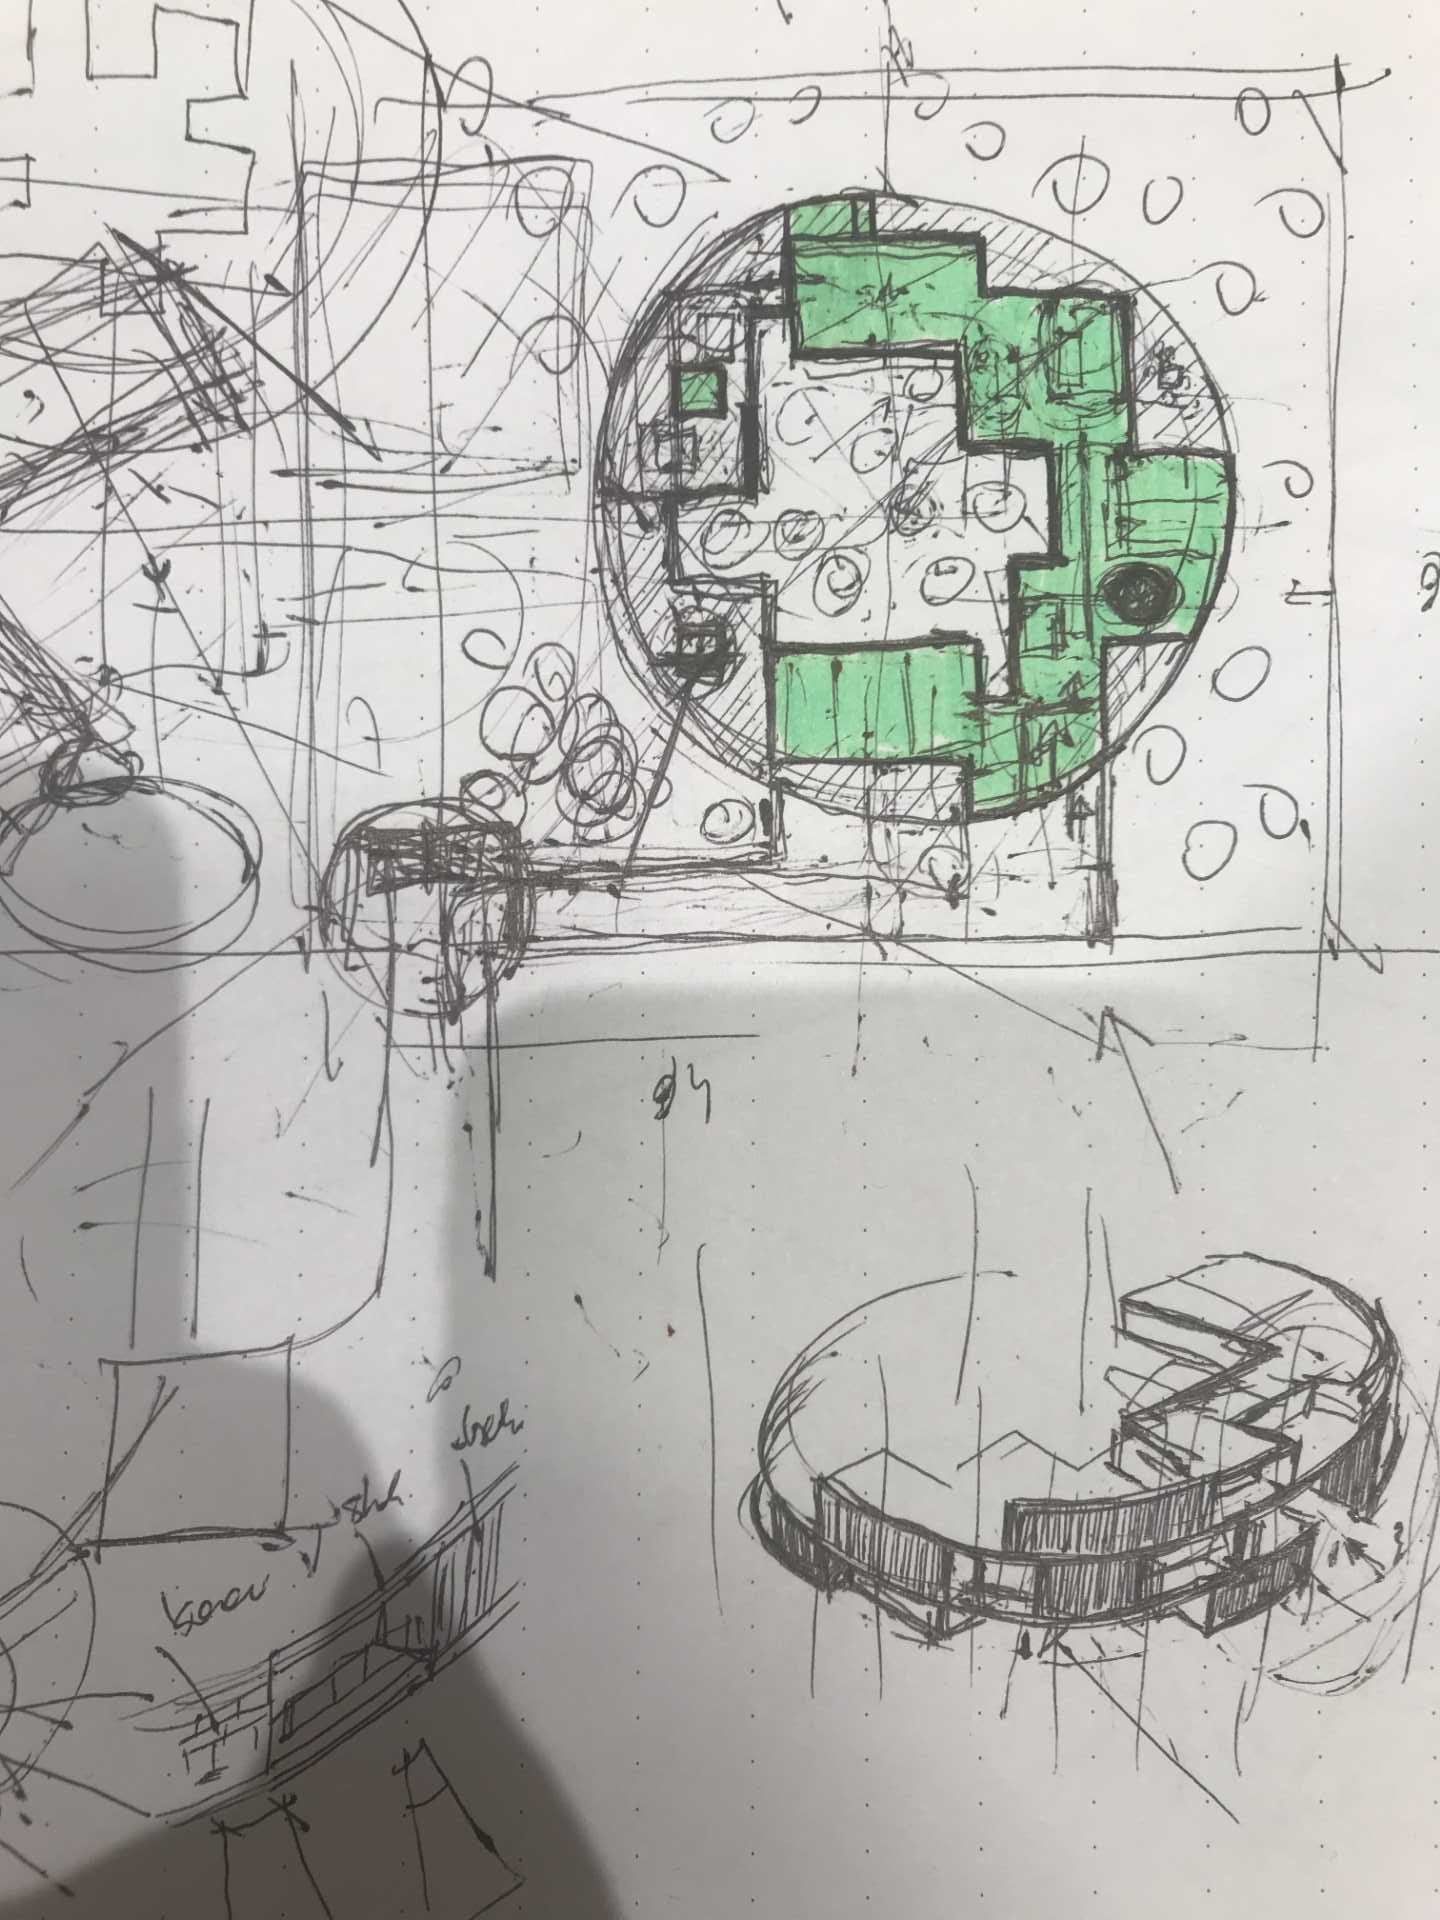 The architect's sketch of a round home.